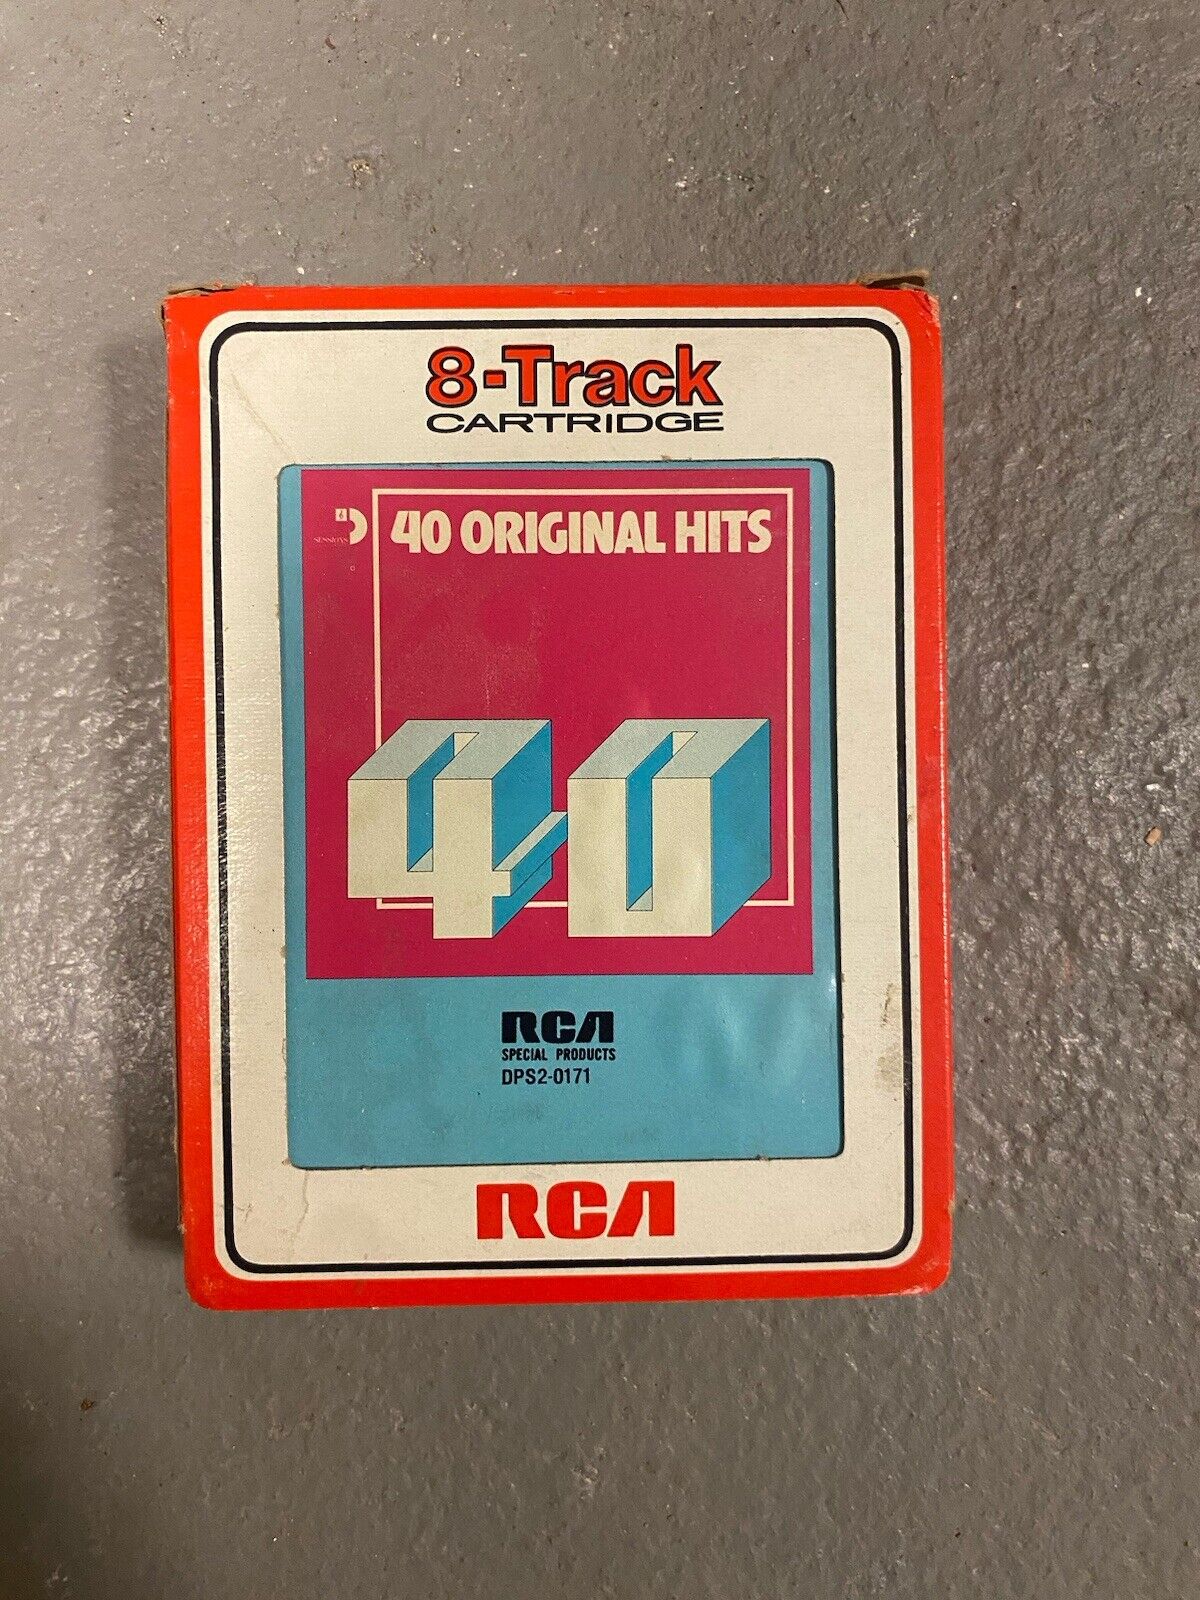 Rare Vintage RCA Sessions 40 Original Hits 8 Track Tape 1976 Tested, Works